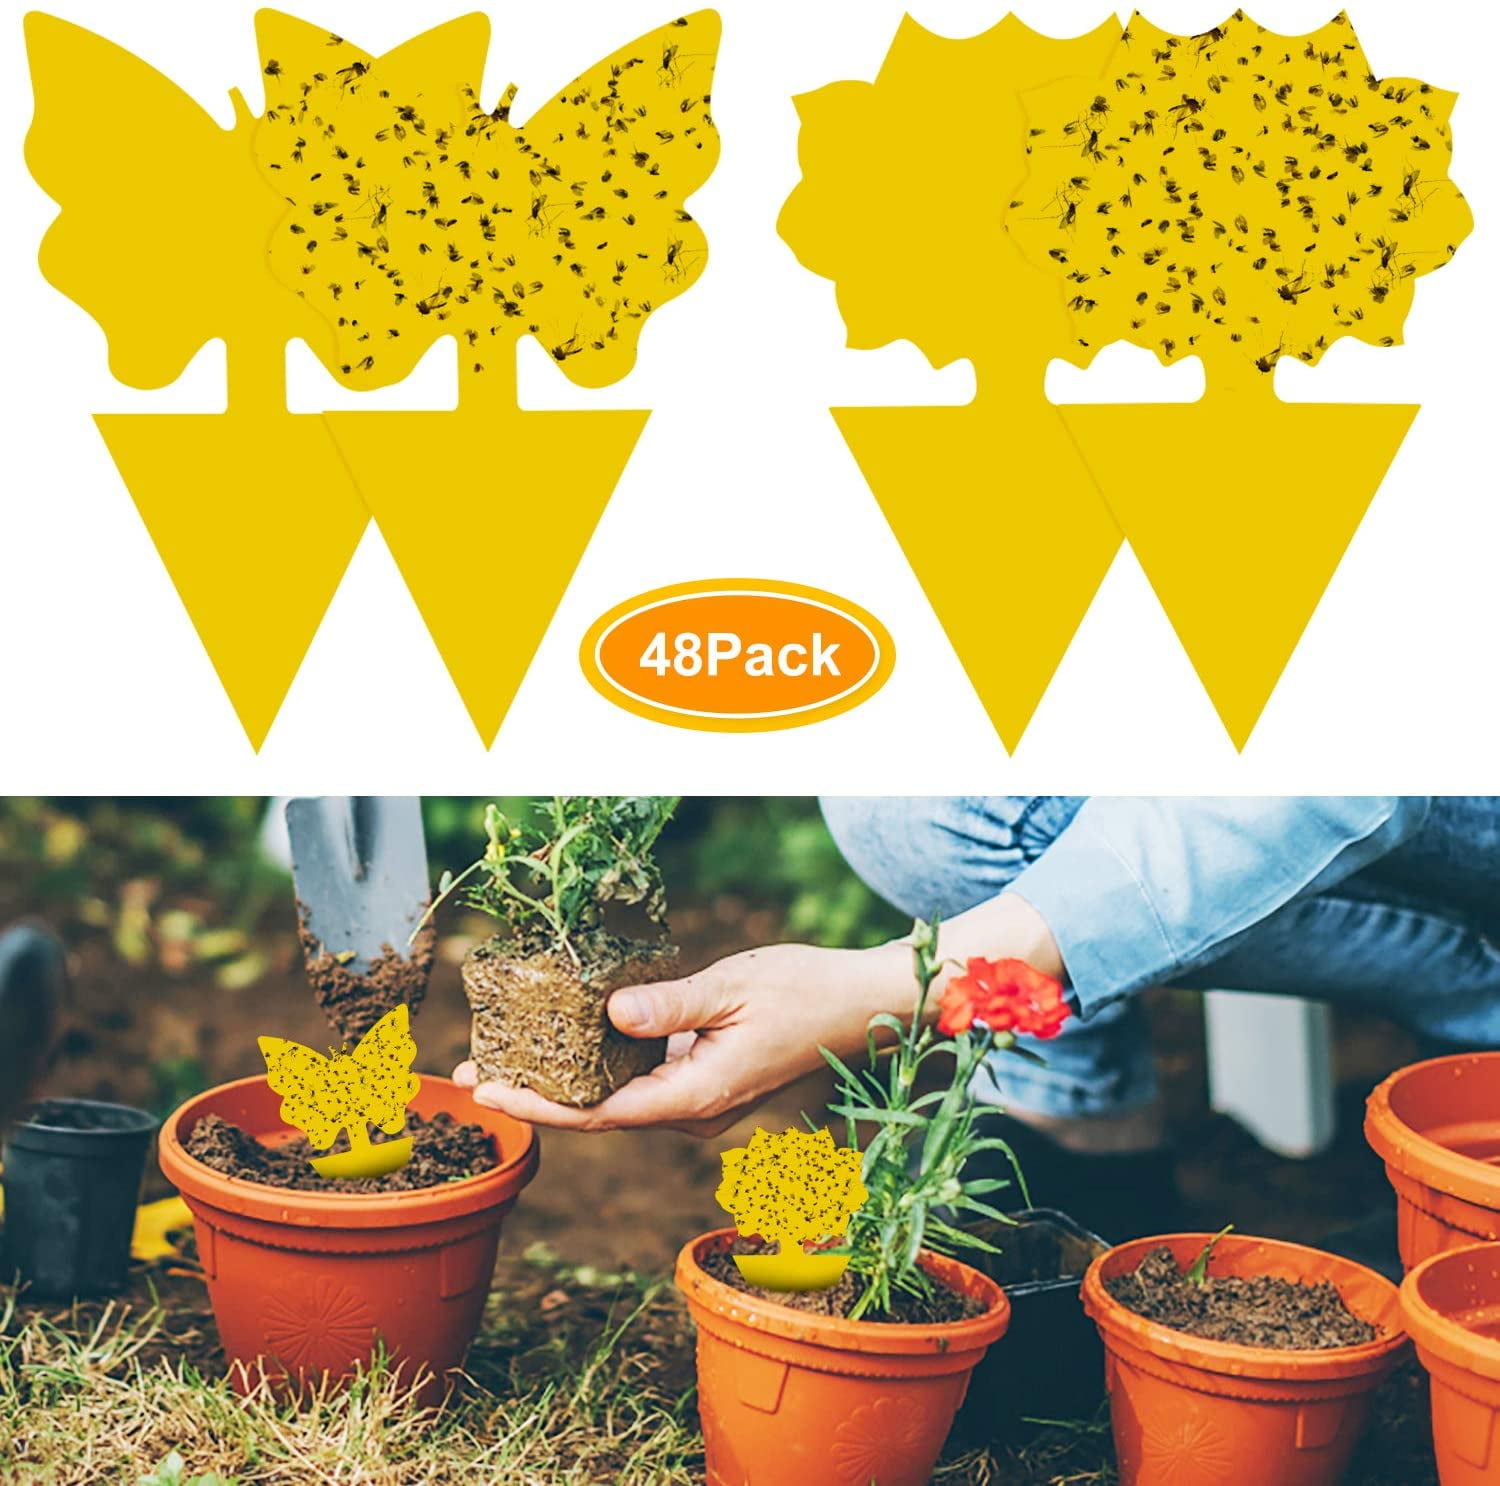 Details about   10/20* Plug-In Fly Trap Yellow Plates Sticker Against Mosquito Aphids,Vermin US 